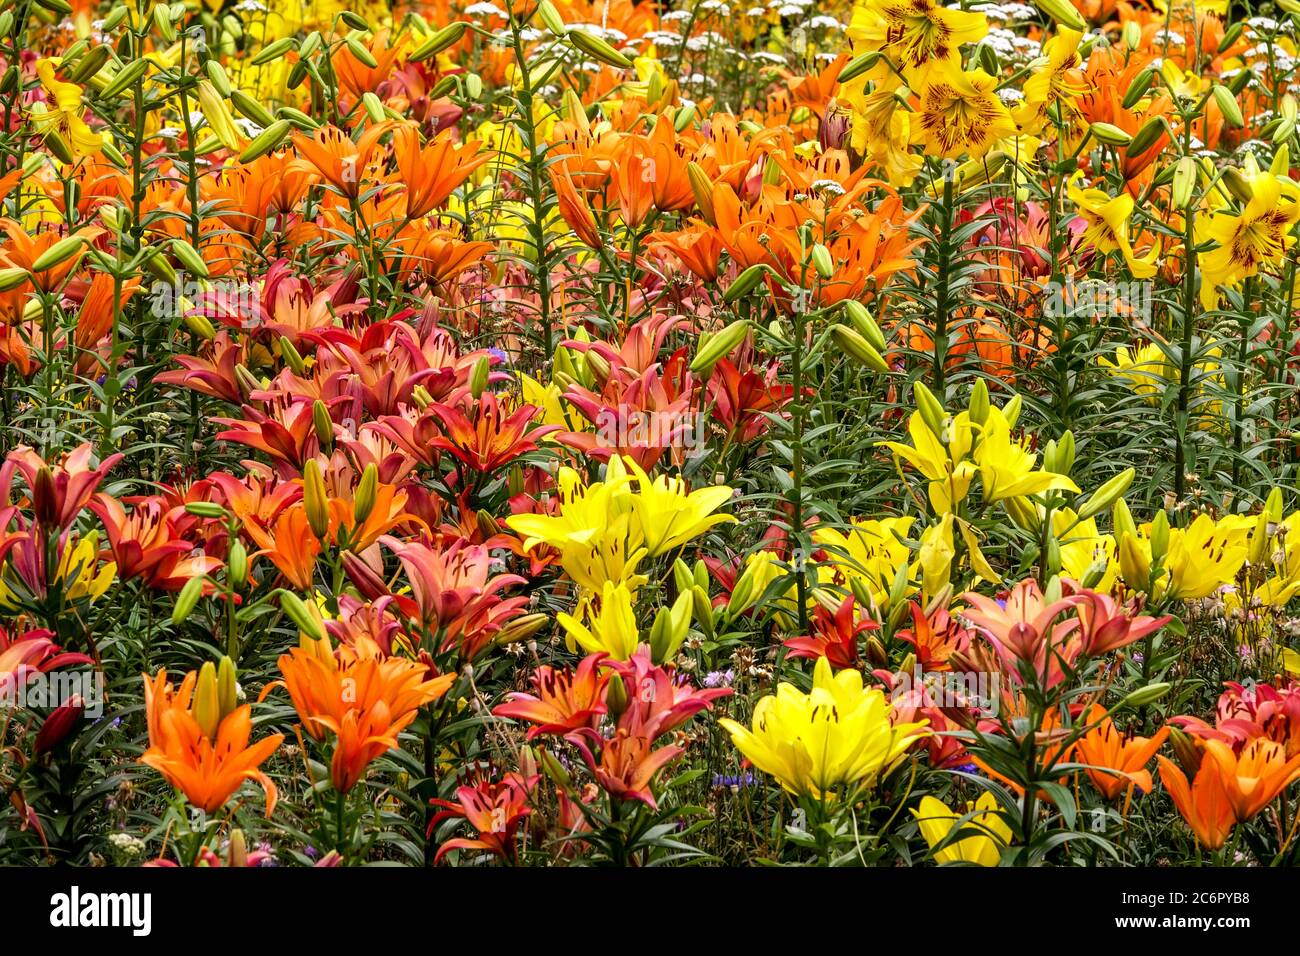 Orange yellow garden flower bed colorful lilies Stock Photo